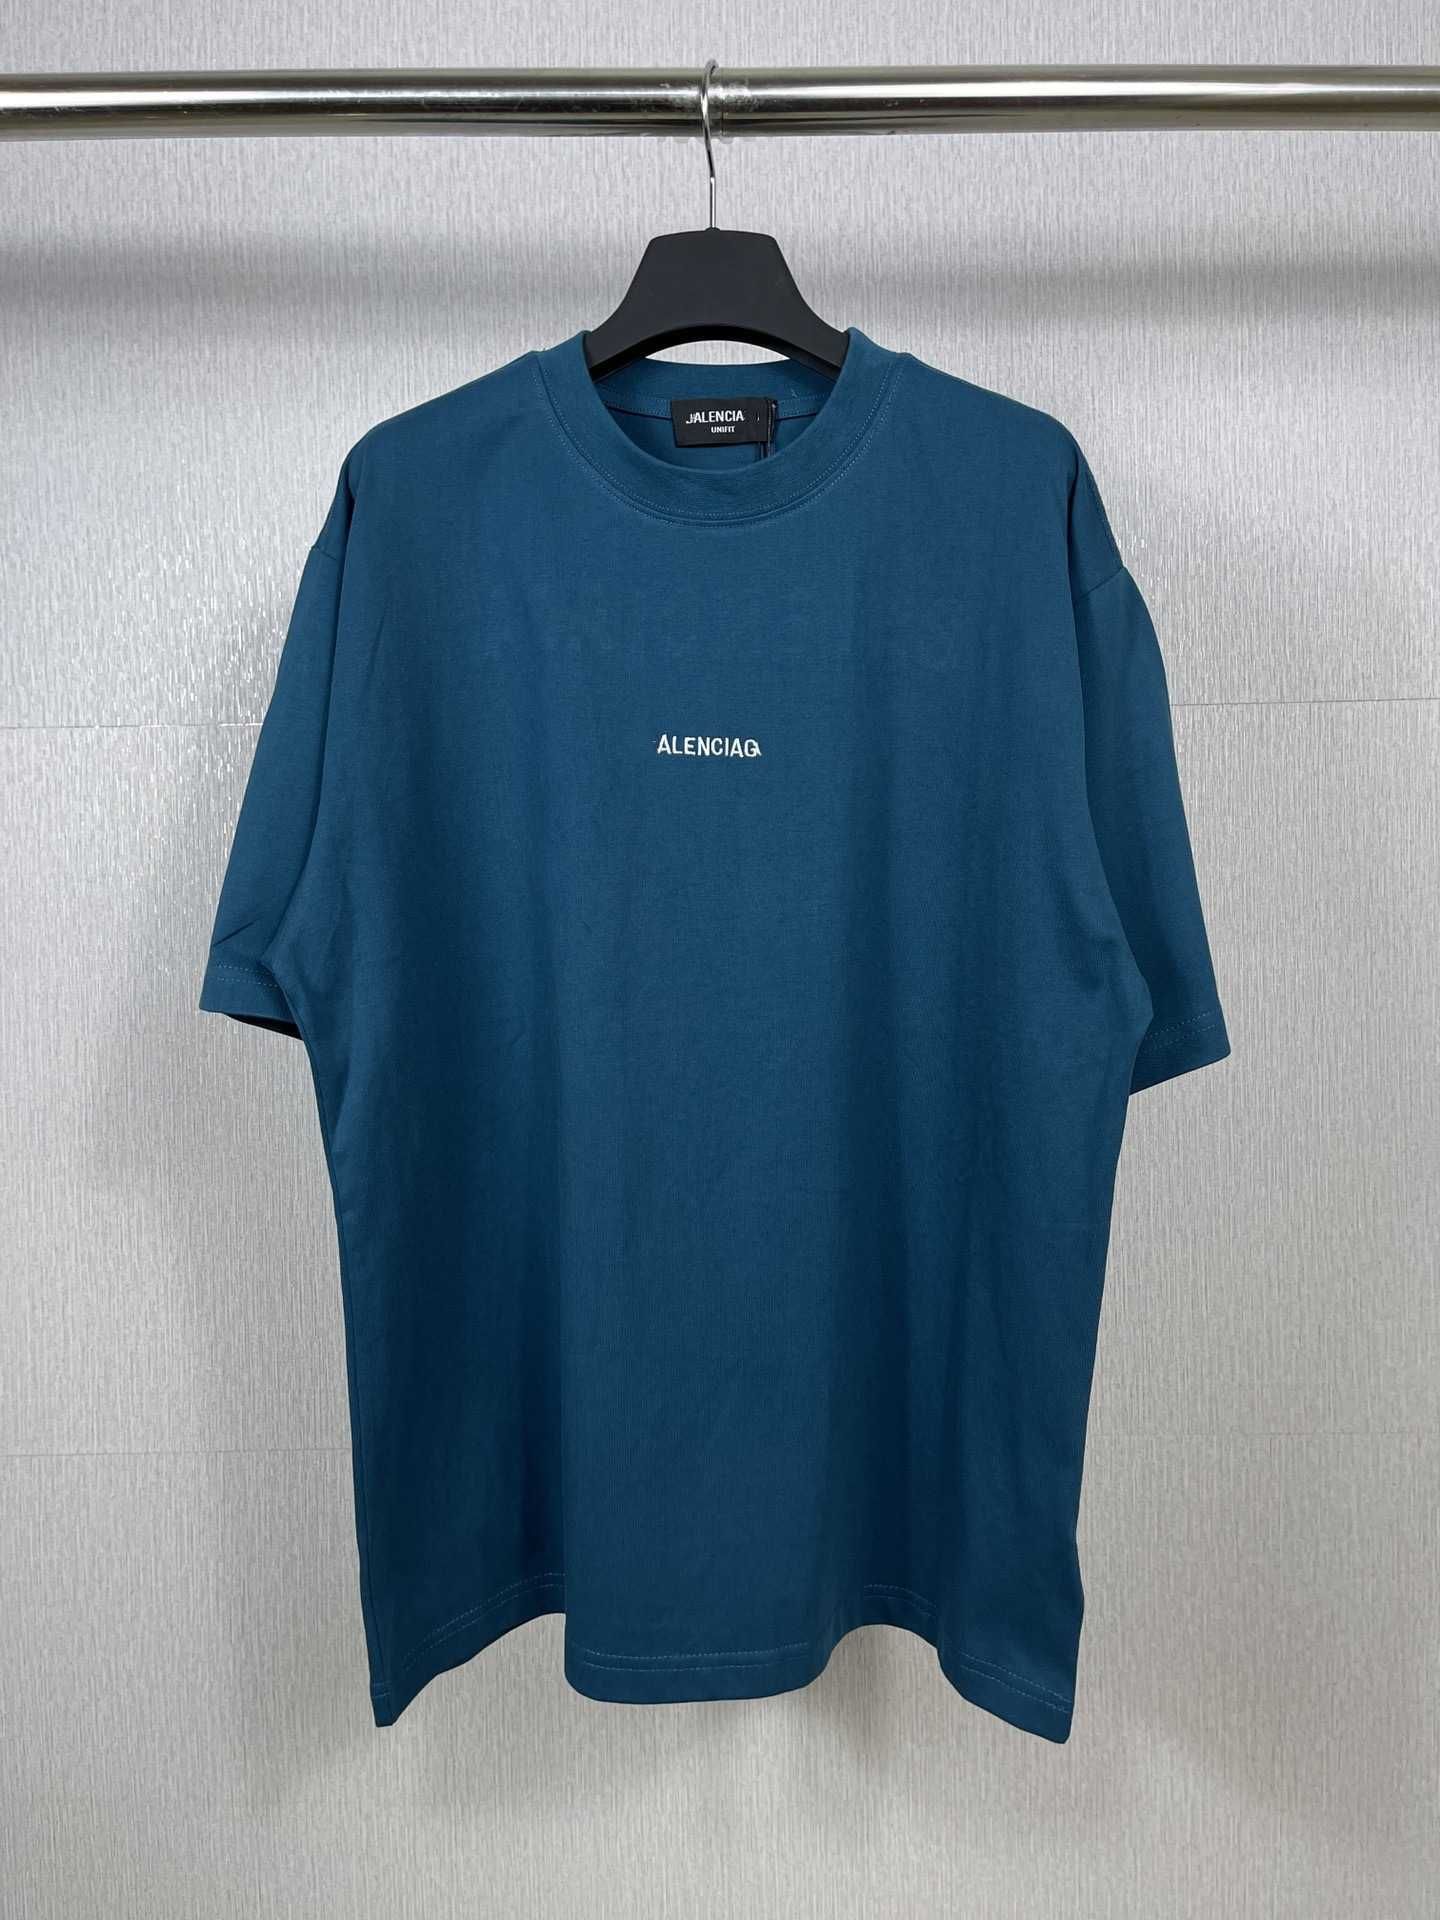 Peacock Blue (embroidered)